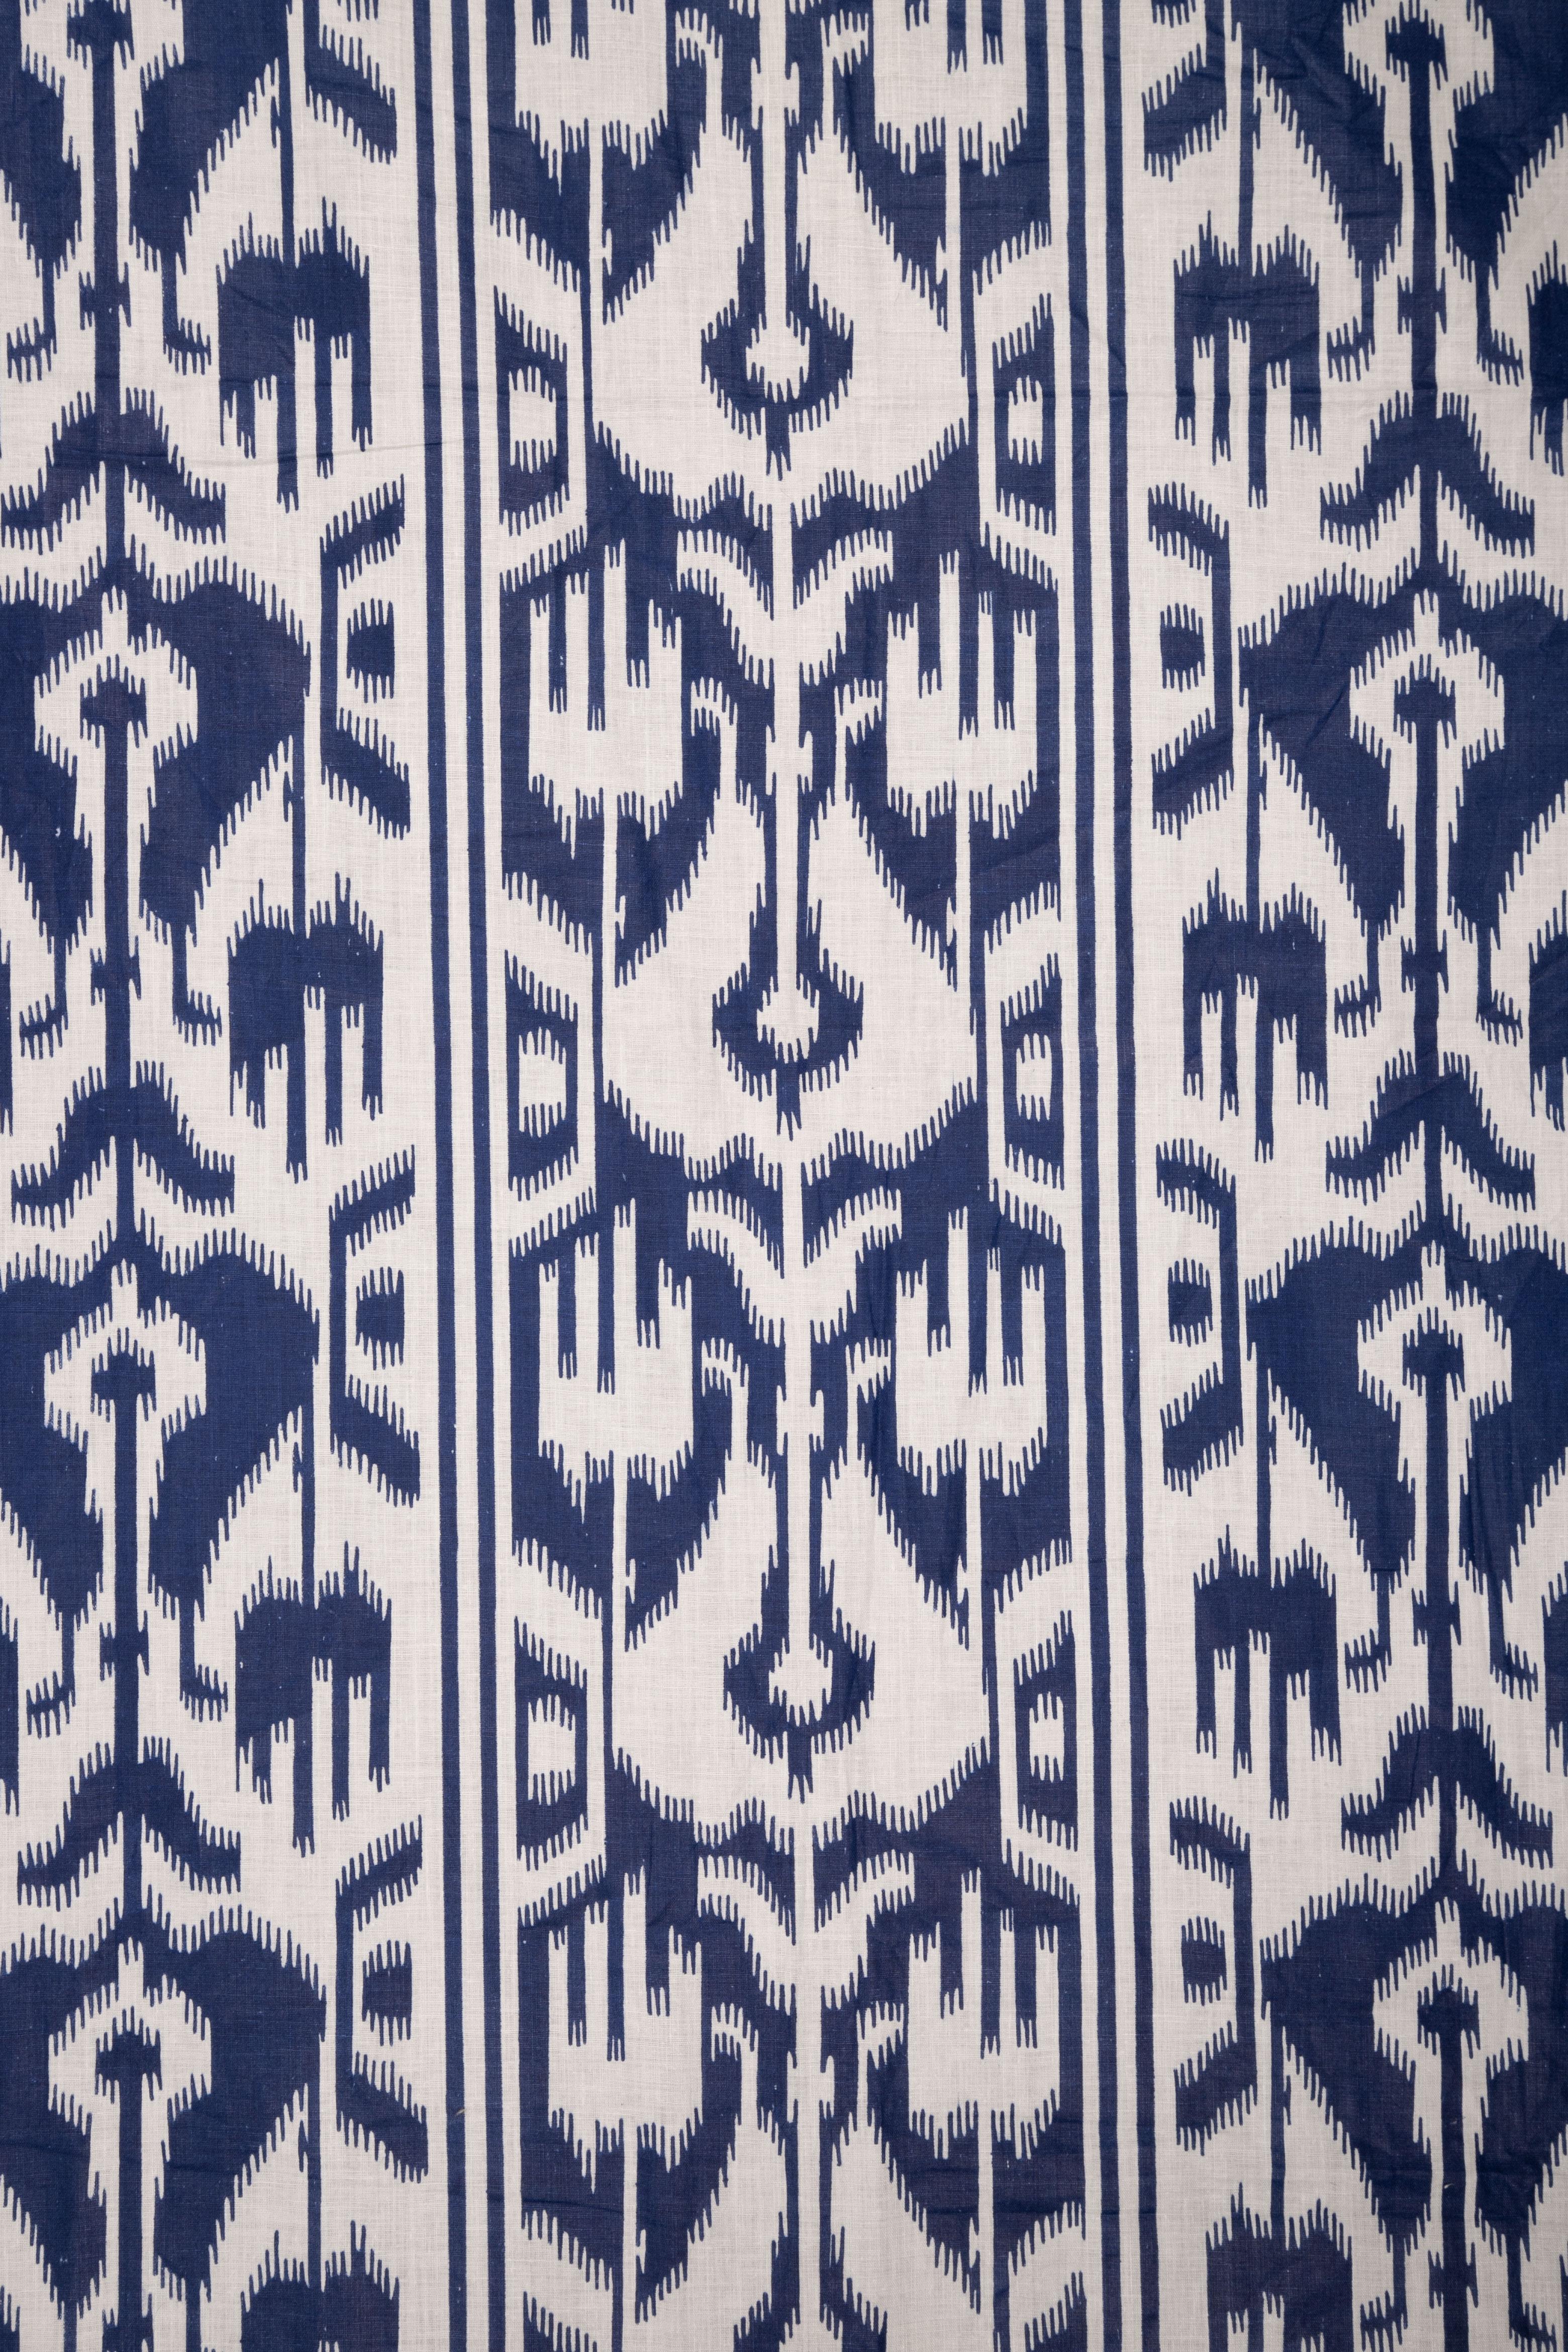 Russian Printed Ikat Design Cotton Fabric Panel, Mid-20th Century or Earlier In Good Condition For Sale In Istanbul, TR